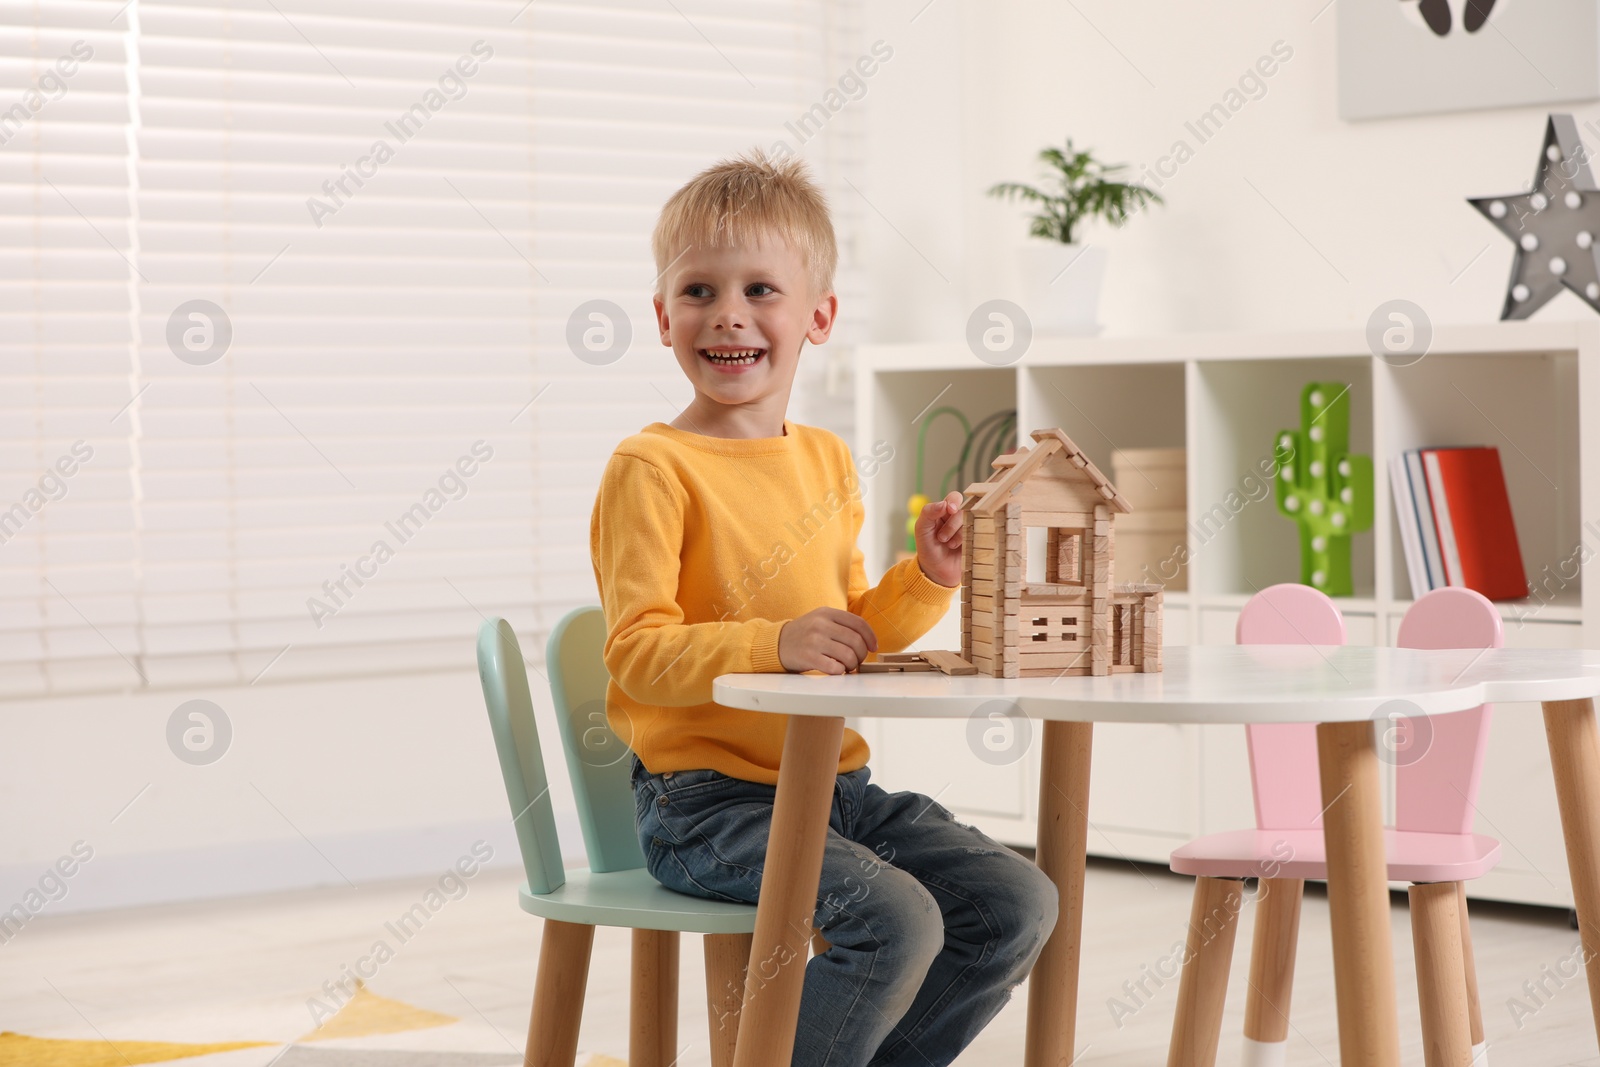 Photo of Cute little boy playing with wooden house at white table indoors, space for text. Child's toy